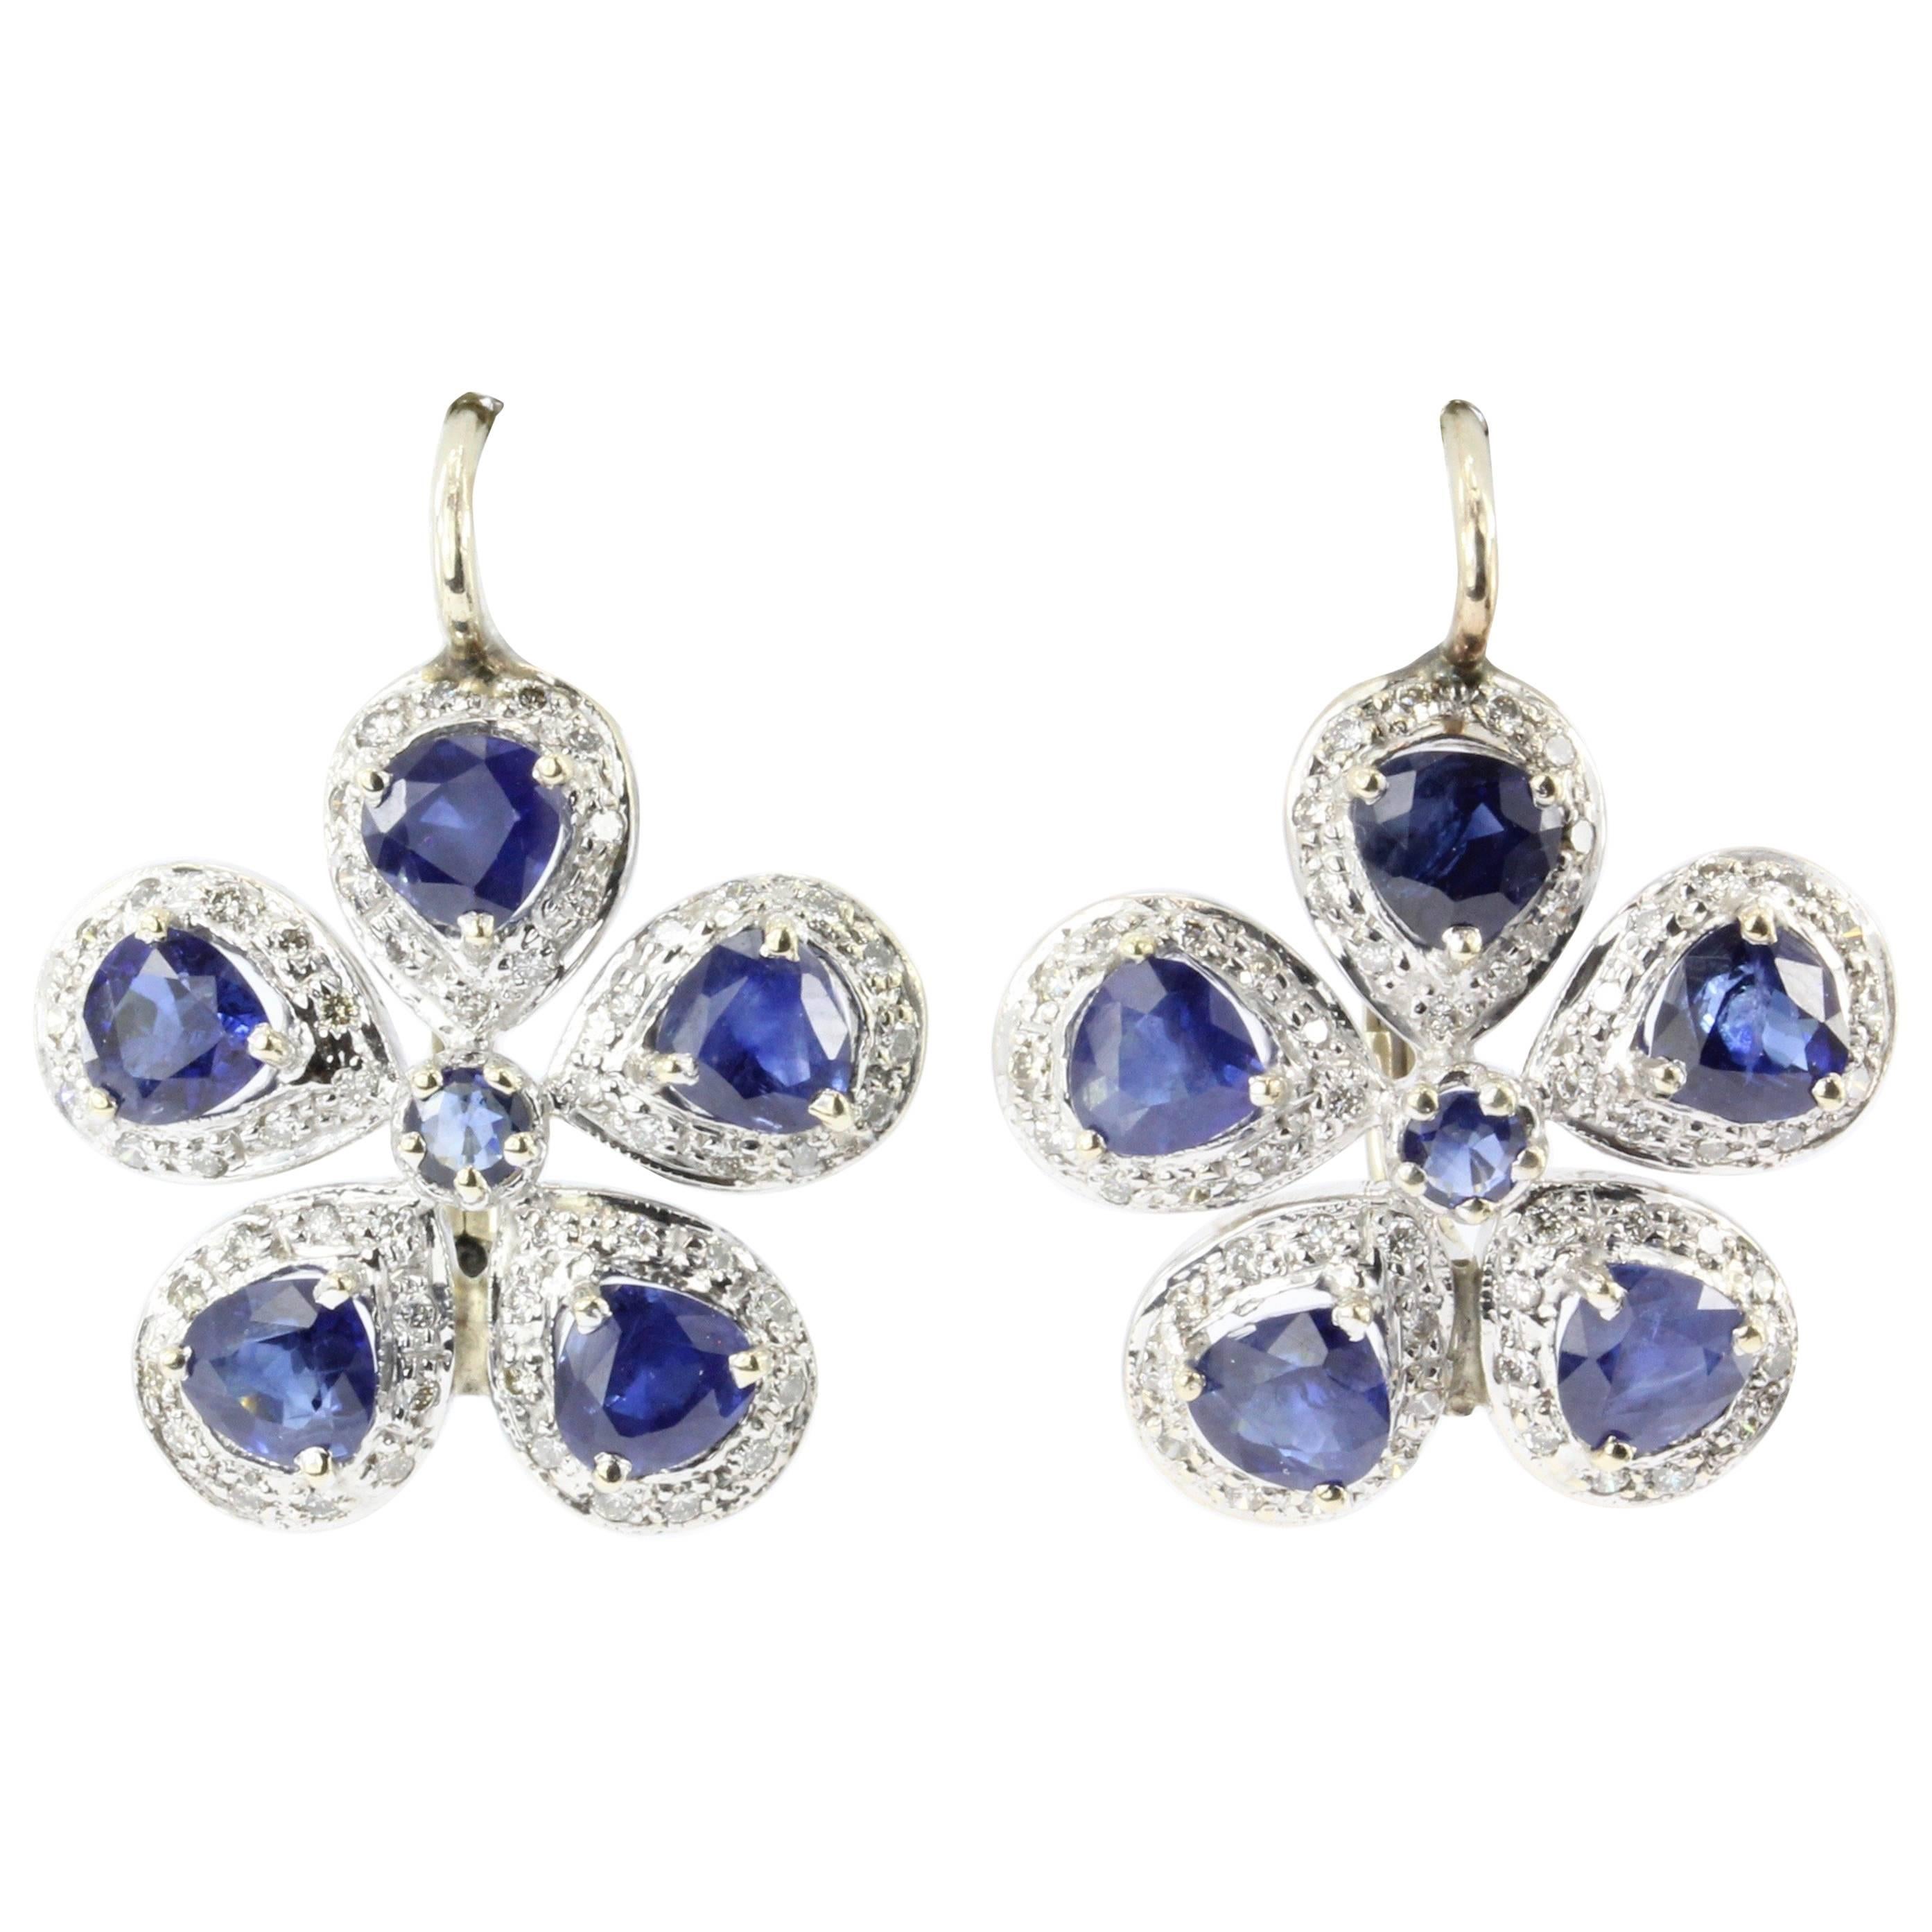 Retro White and Yellow Gold Natural Blue Sapphire Diamond Earrings